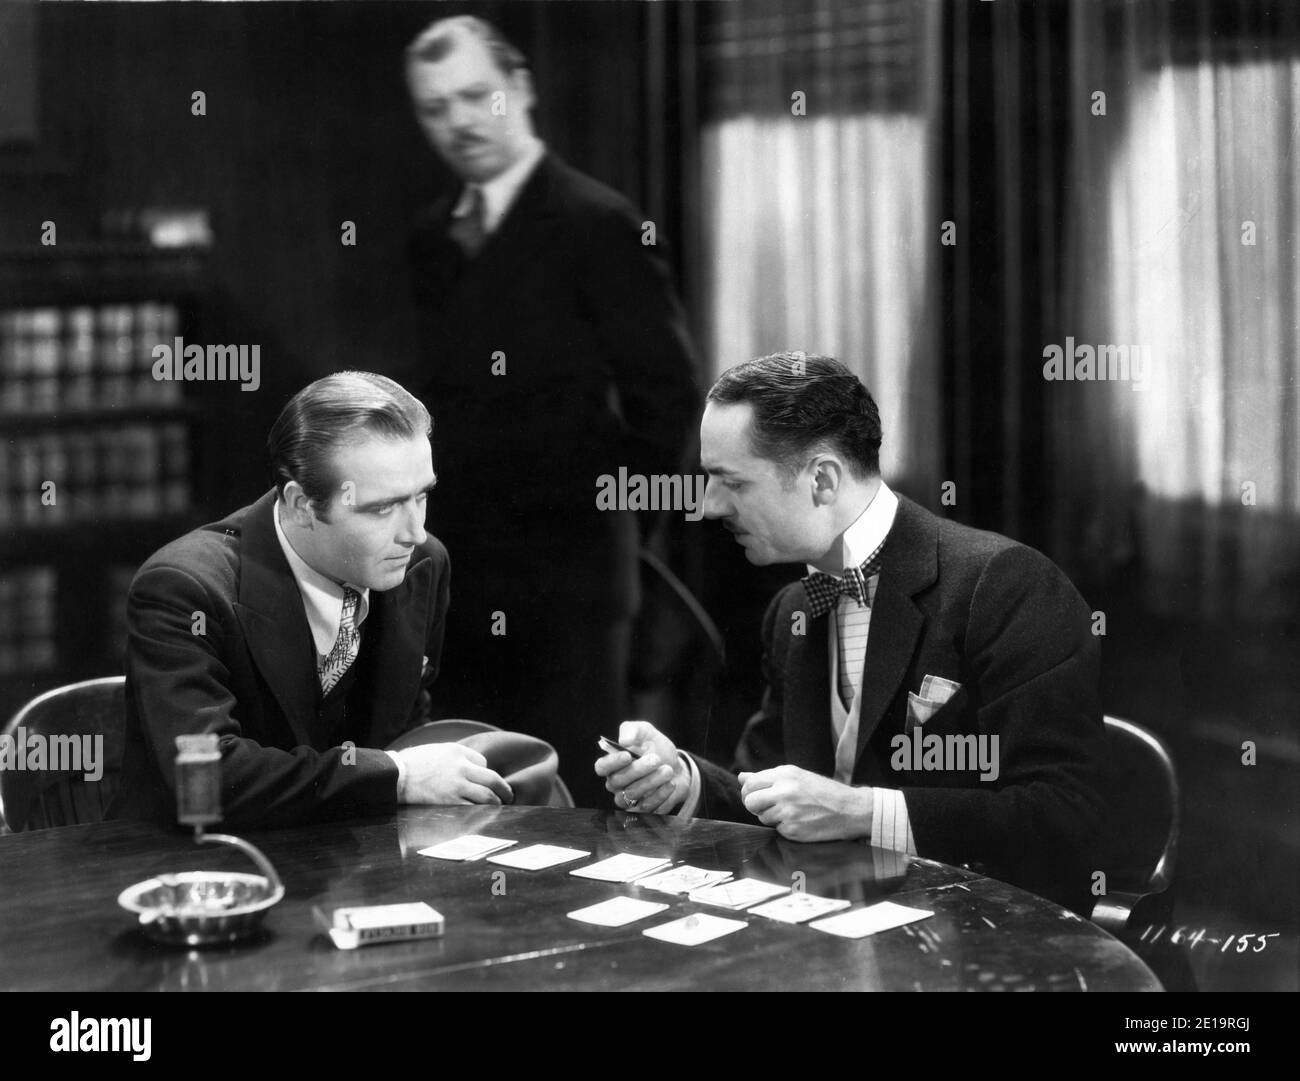 JAMES HALL LOUIS JOHN BARTELS and WILLIAM POWELL as Philo Vance  in THE CANARY MURDER CASE 1929 director MALCOLM ST. CLAIR from the novel by S.S. VAN DINE Paramount Pictures Stock Photo